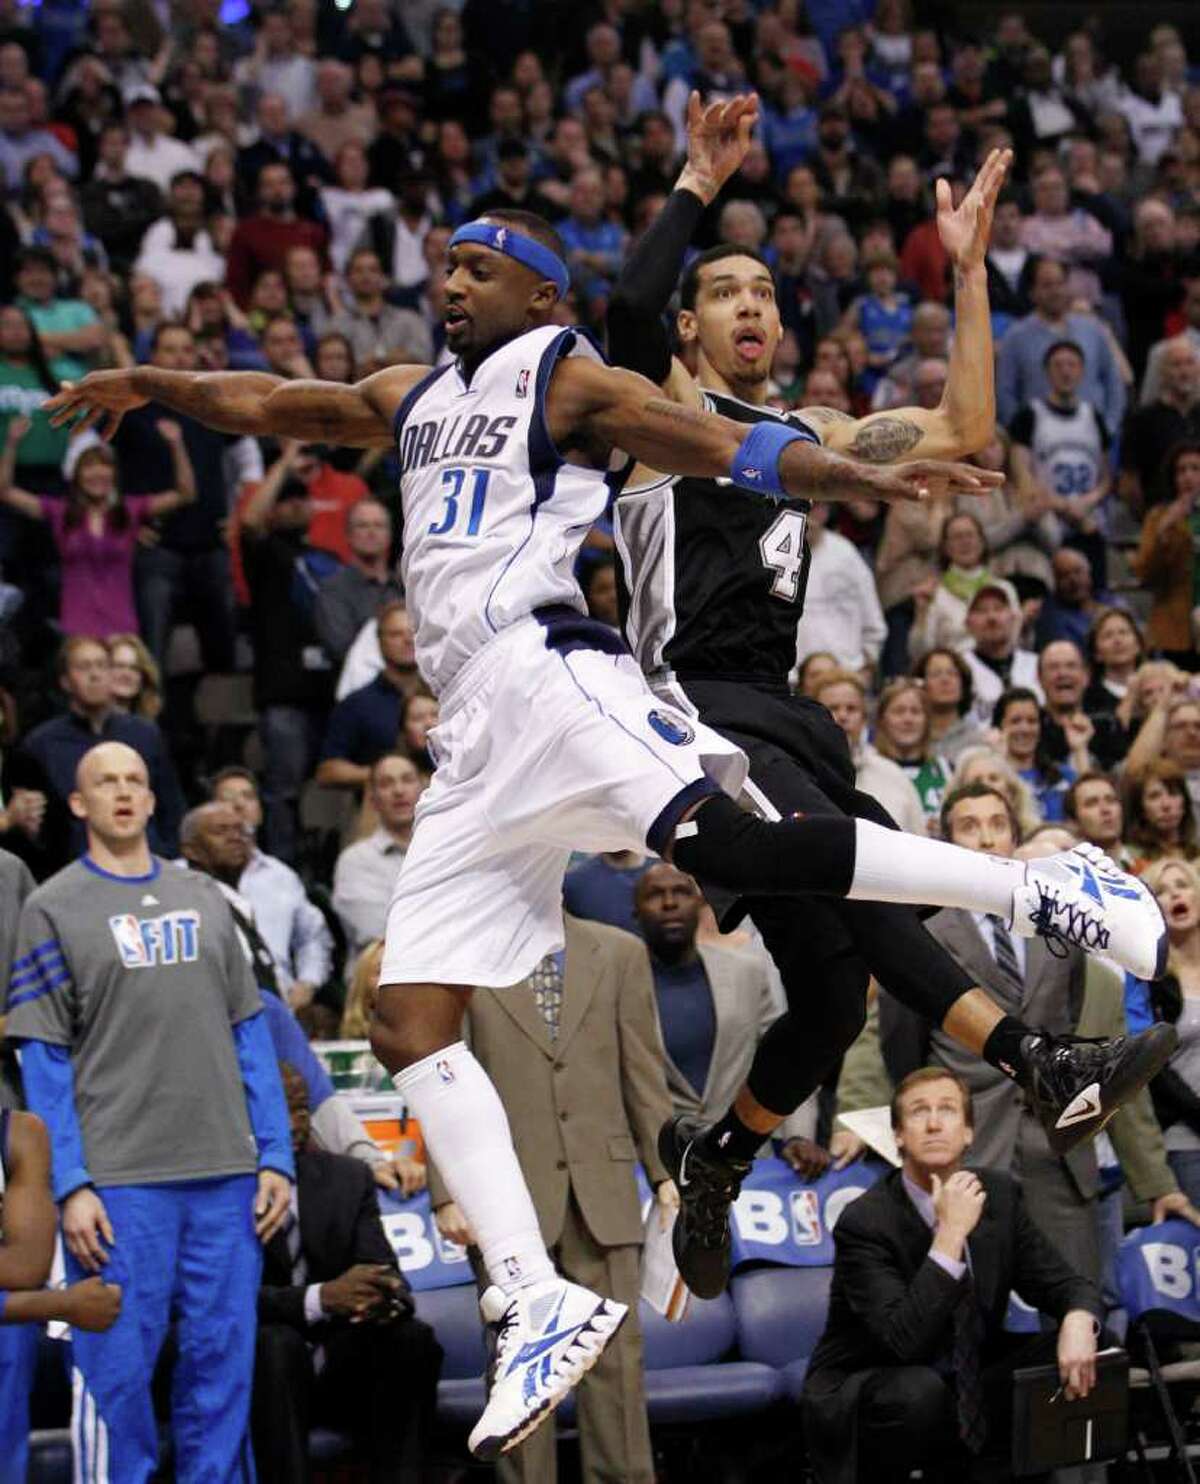 After putting the Spurs in a hole, the Mavs' Jason Terry (31) tries to distract Danny Green on a potential game-winning shot that came up short at the buzzer.